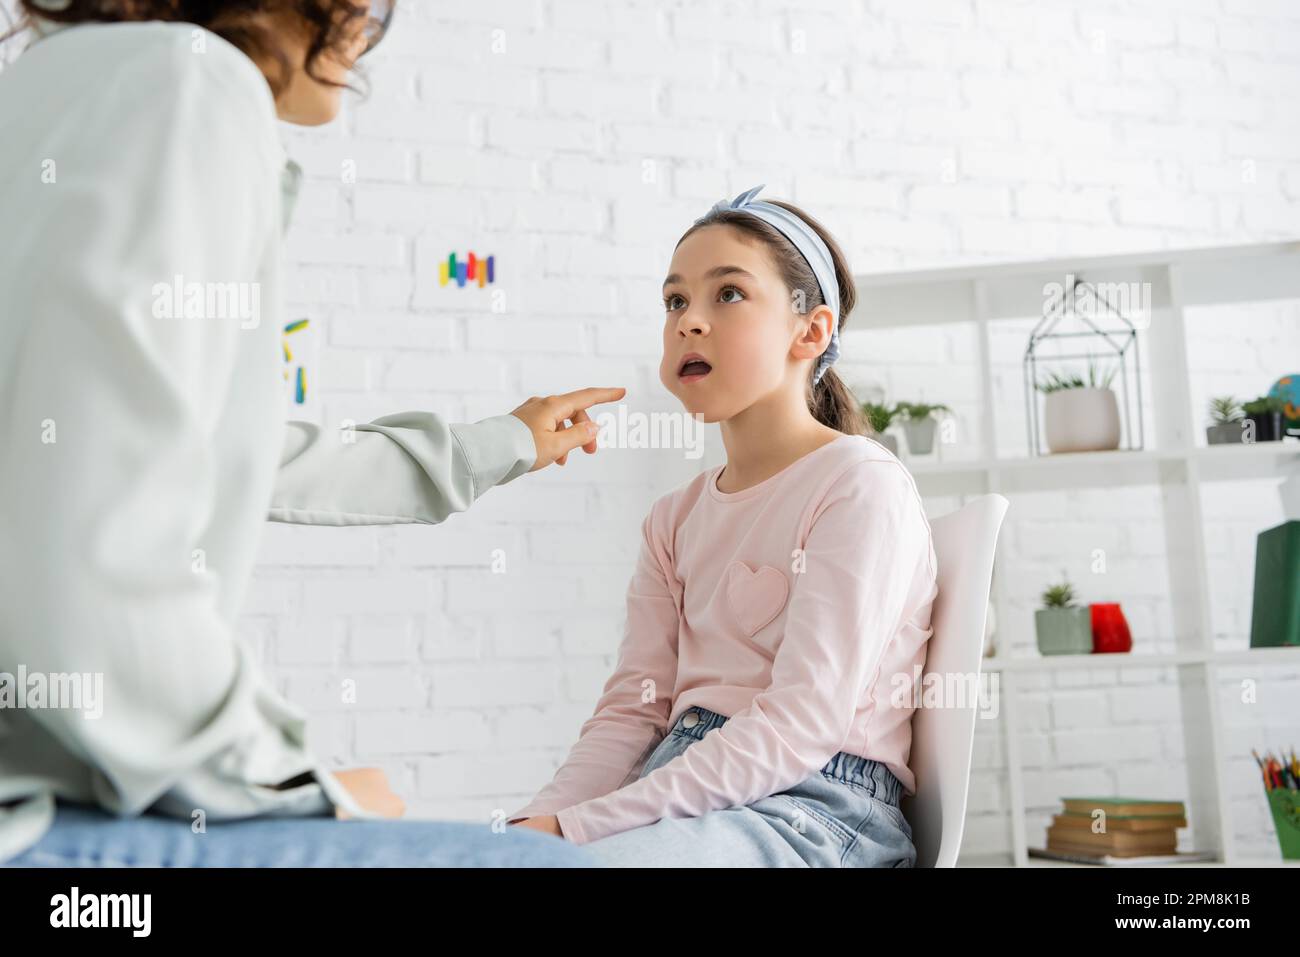 Speech therapist pointing at cheek of preteen girl in consulting room,stock image Stock Photo